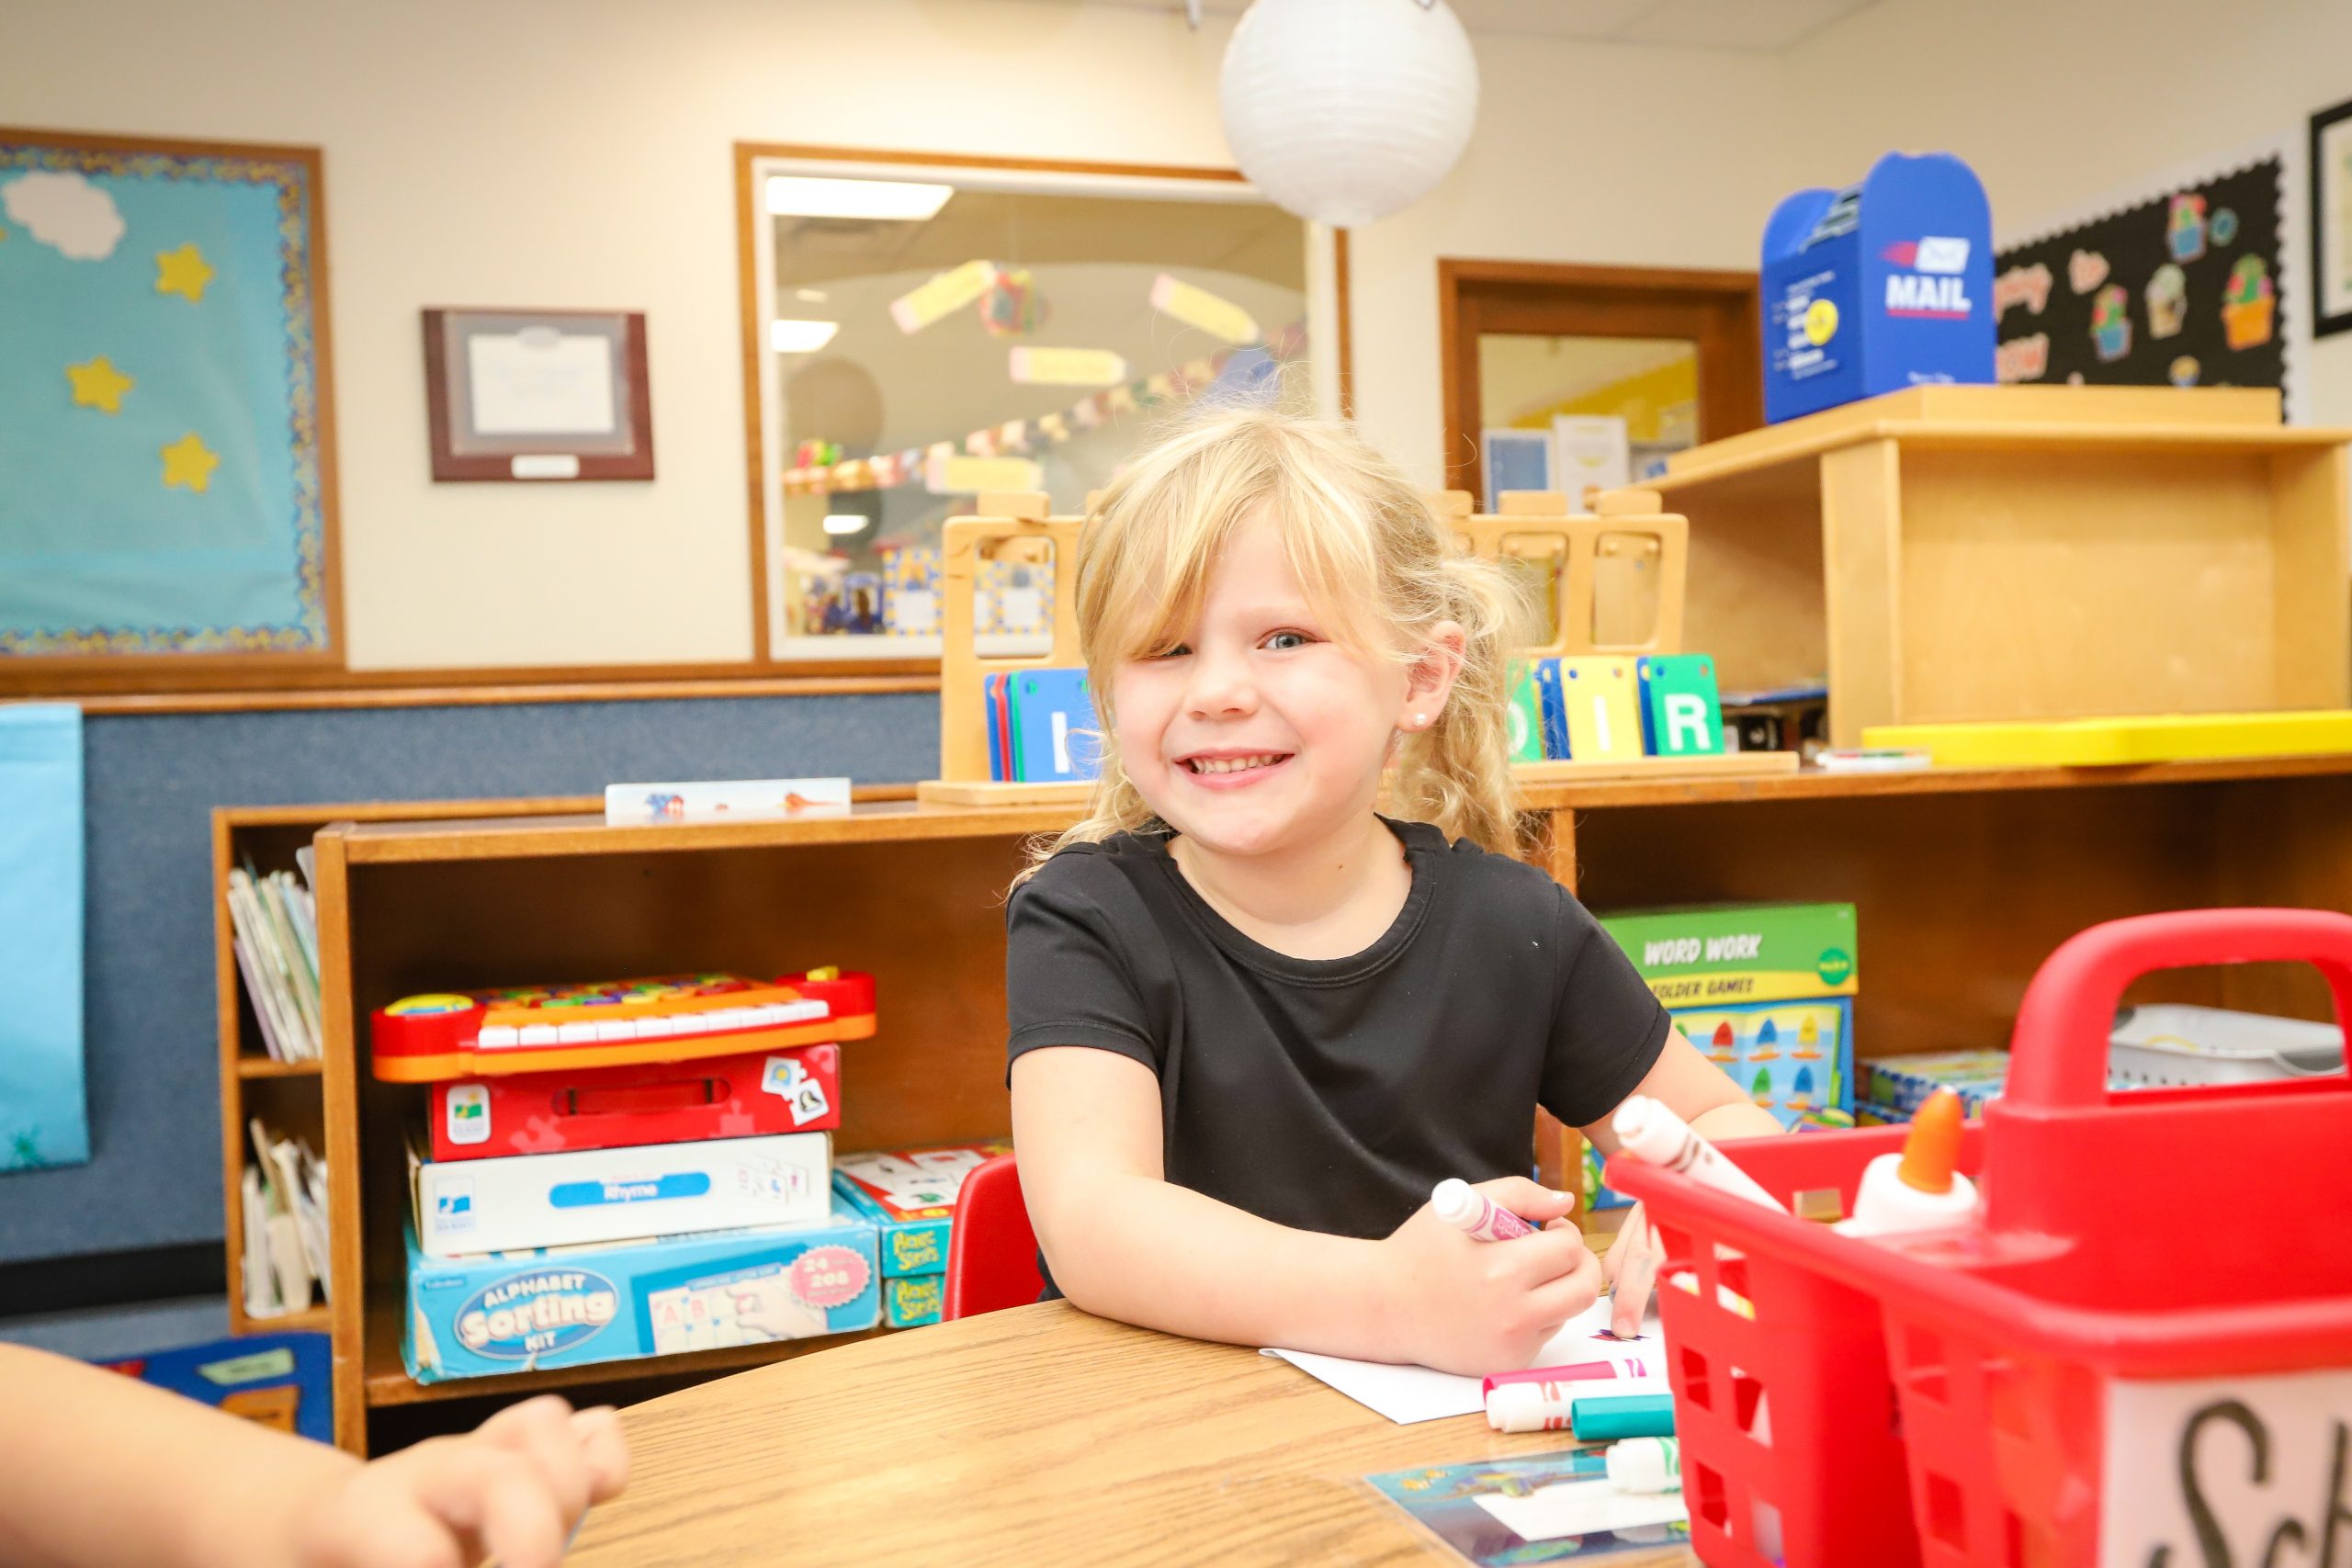 Country Home provides exceptionally small classes to promote individualized care and education